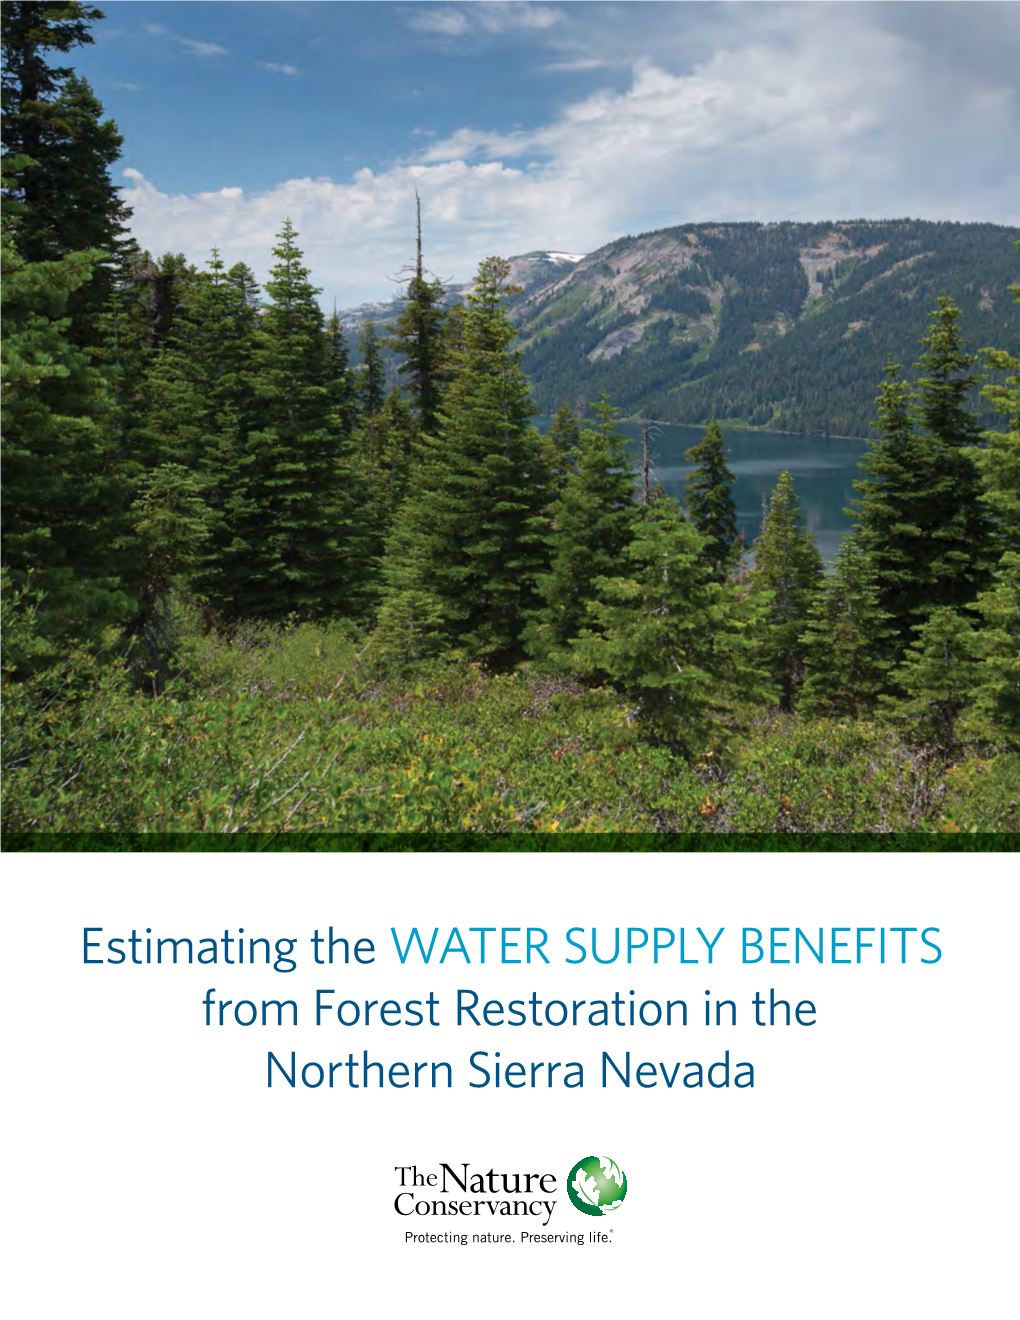 Estimating the WATER SUPPLY BENEFITS from Forest Restoration